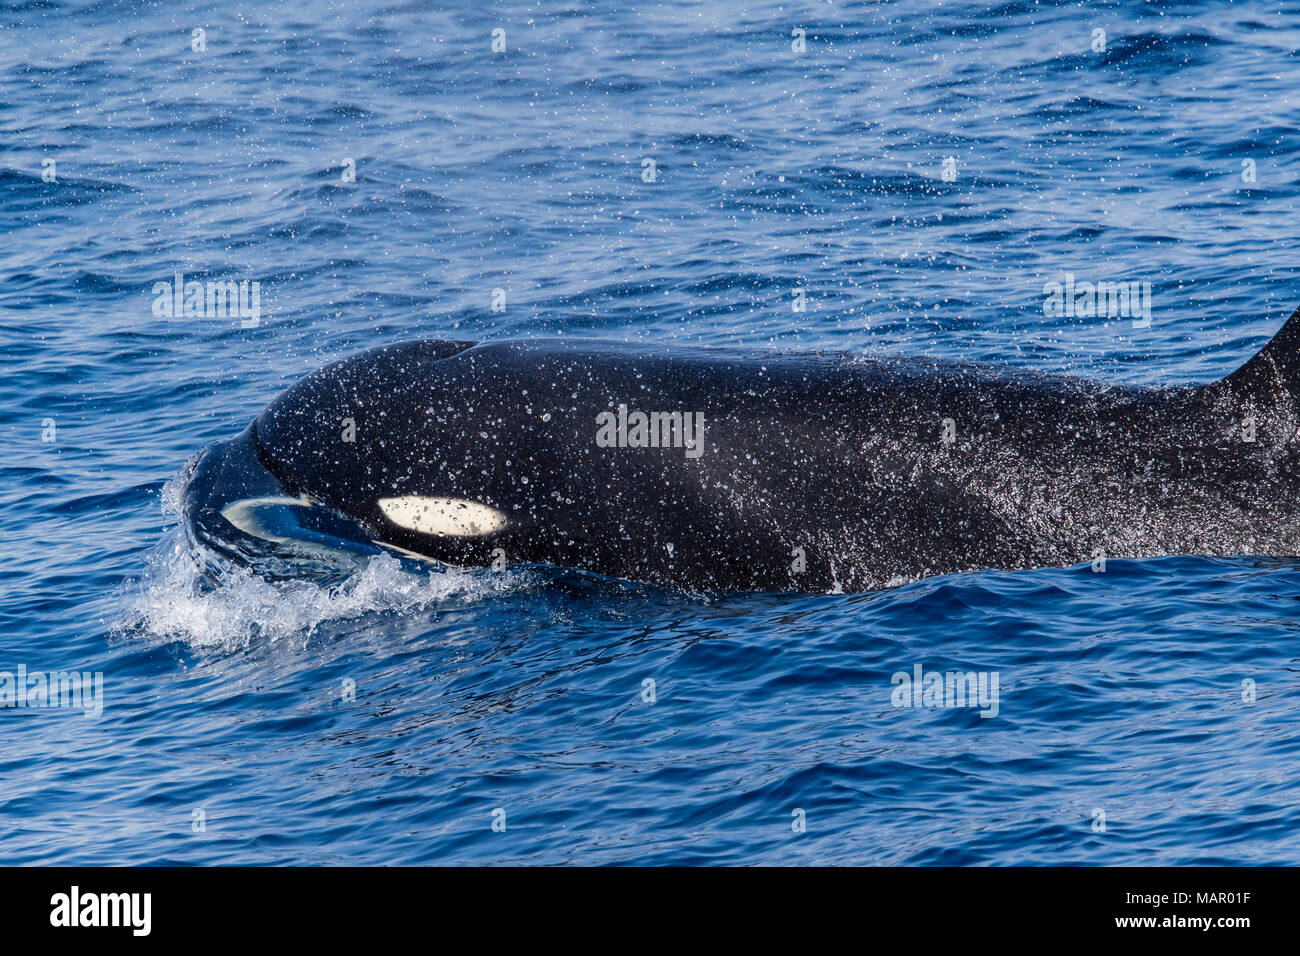 A Type D (sub-Antarctic) killer whale (Orcinus orca), surfacing in the Drake Passage, Antarctica, Polar Regions Stock Photo